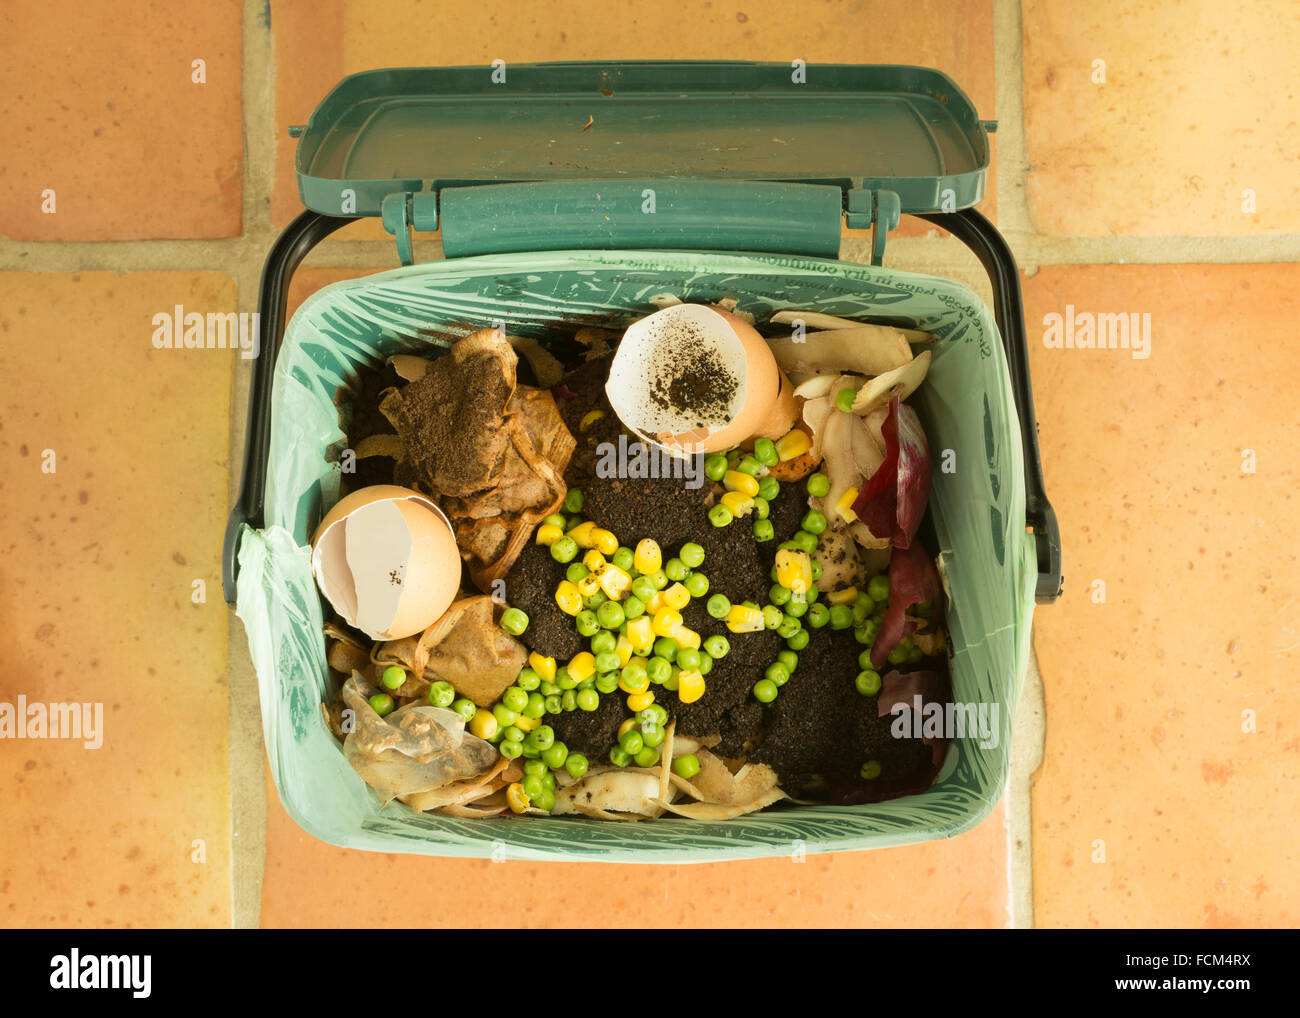 https://c8.alamy.com/comp/FCM4RX/food-waste-indoor-food-recycling-caddy-full-of-kitchen-waste-for-recycling-FCM4RX.jpg